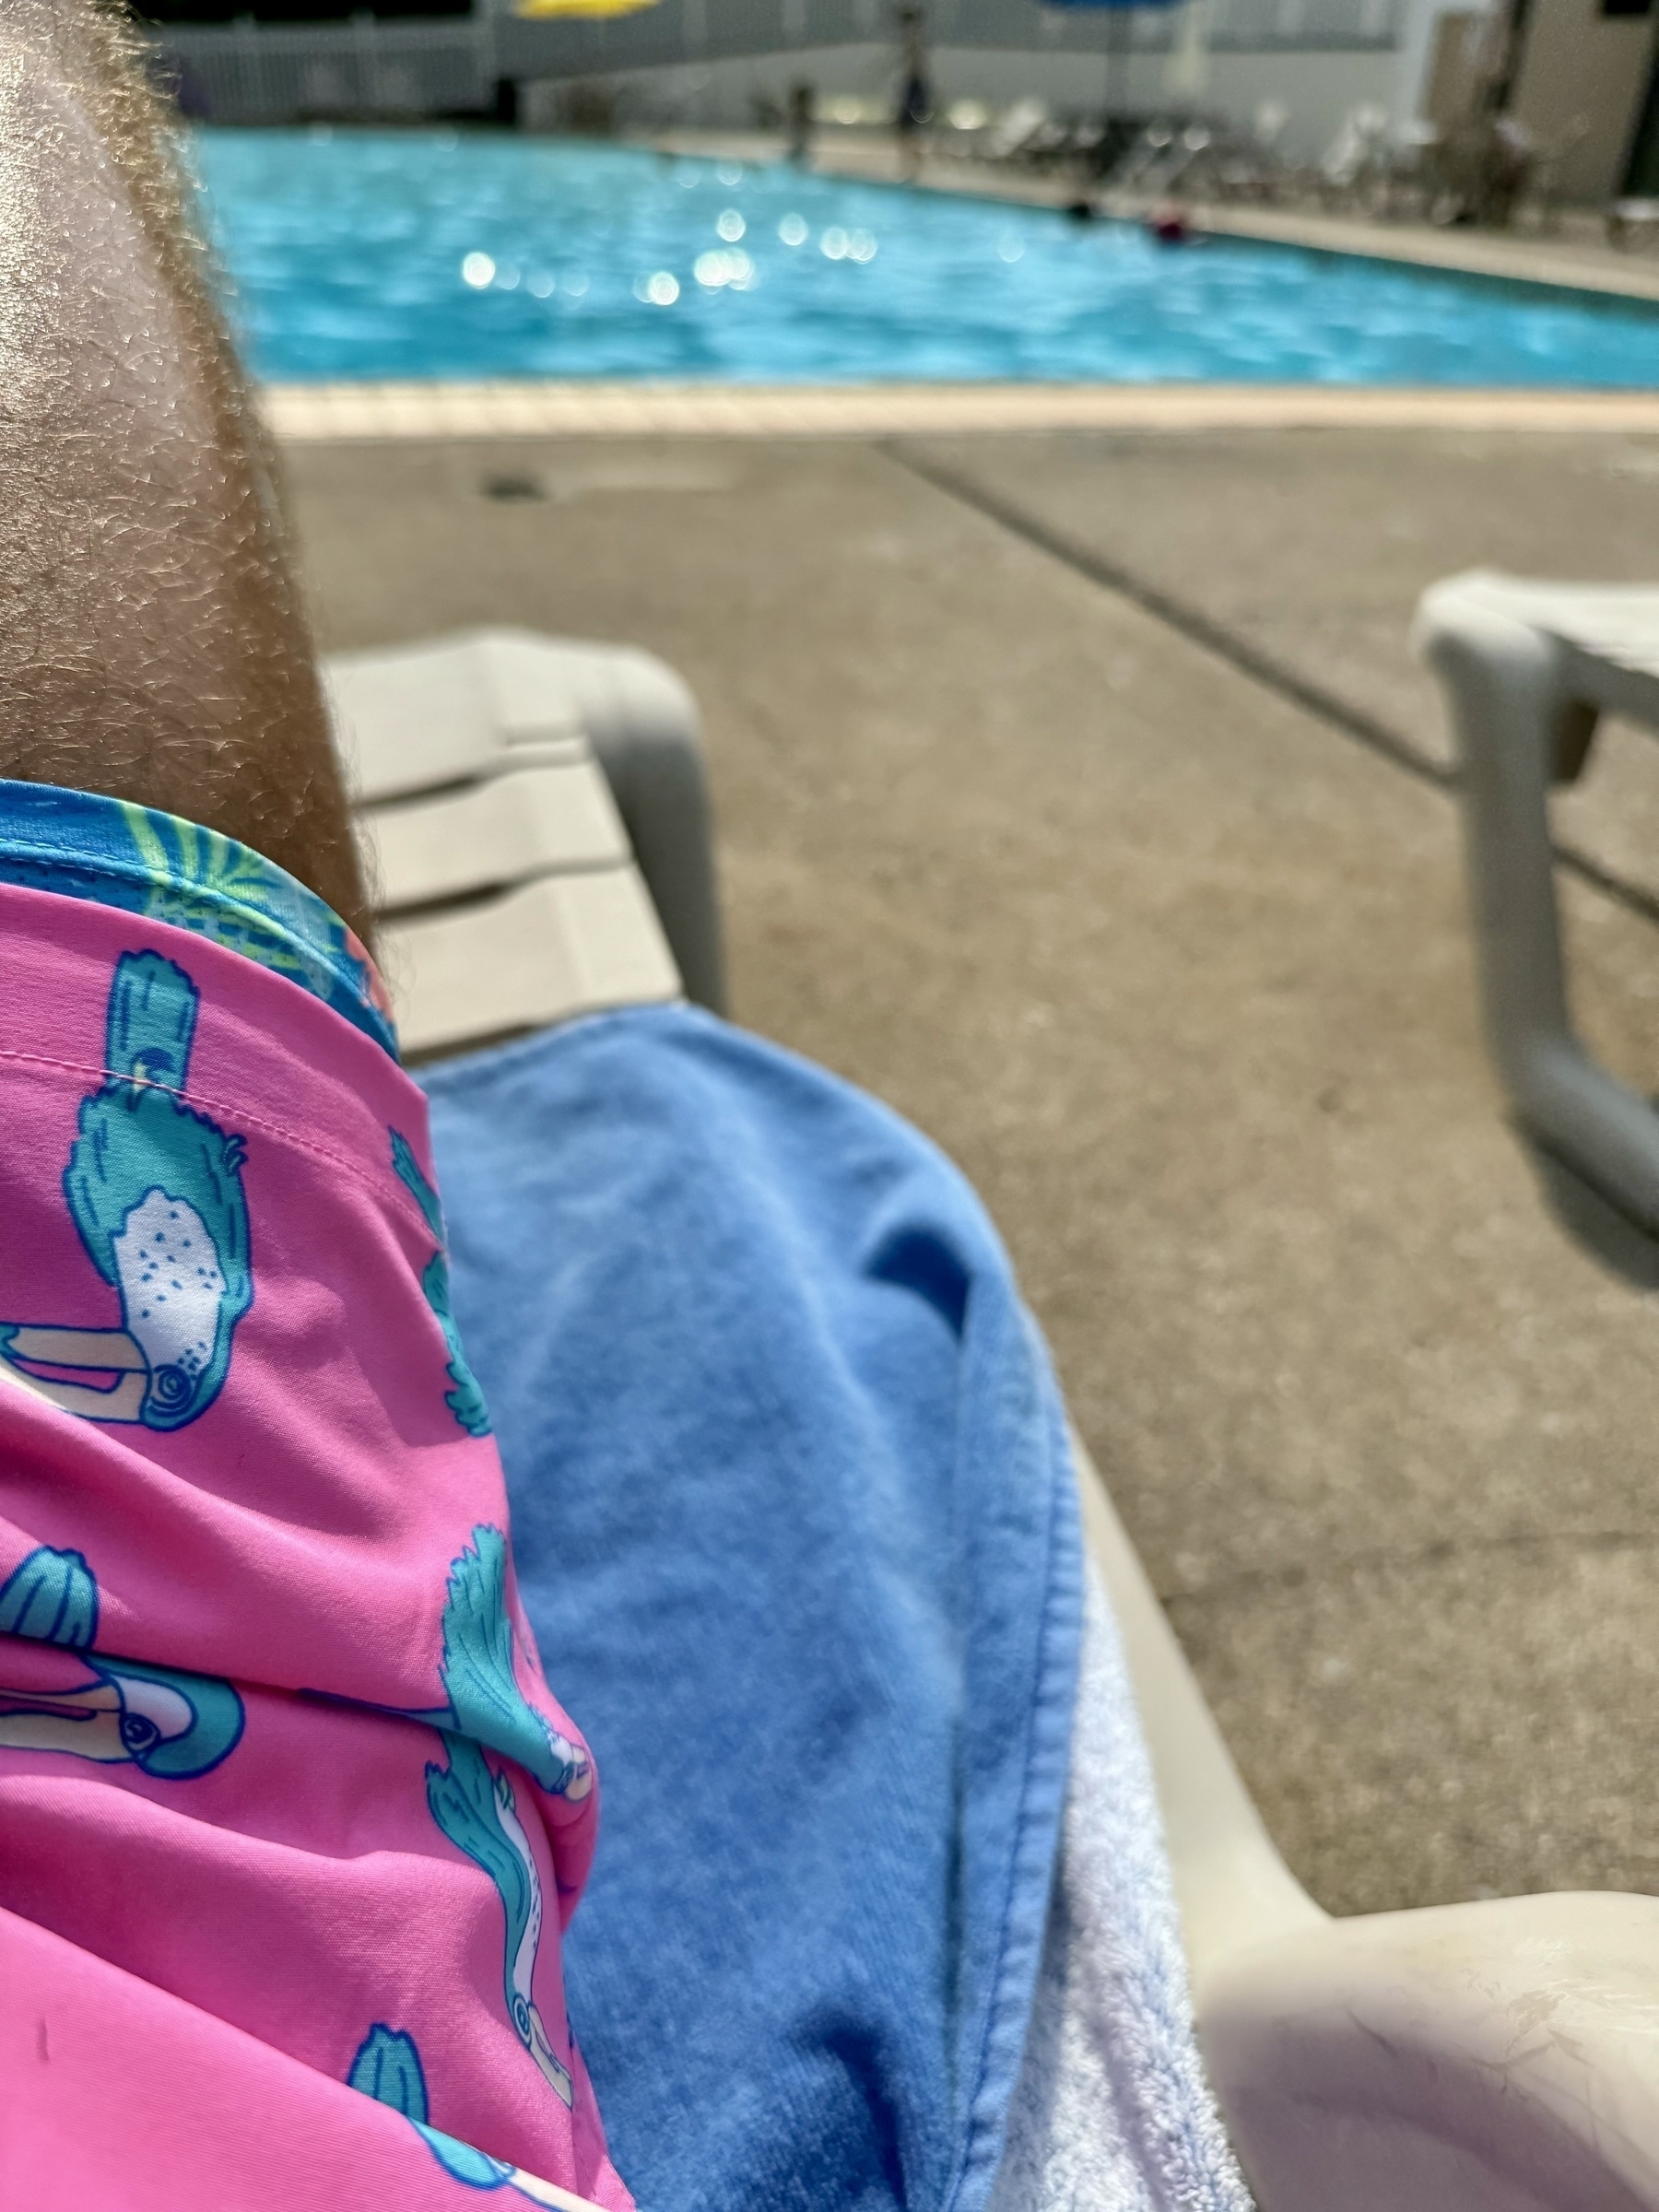 A person with pink swim trunks featuring a swimming bird design is lying on a poolside chair near a swimming pool.